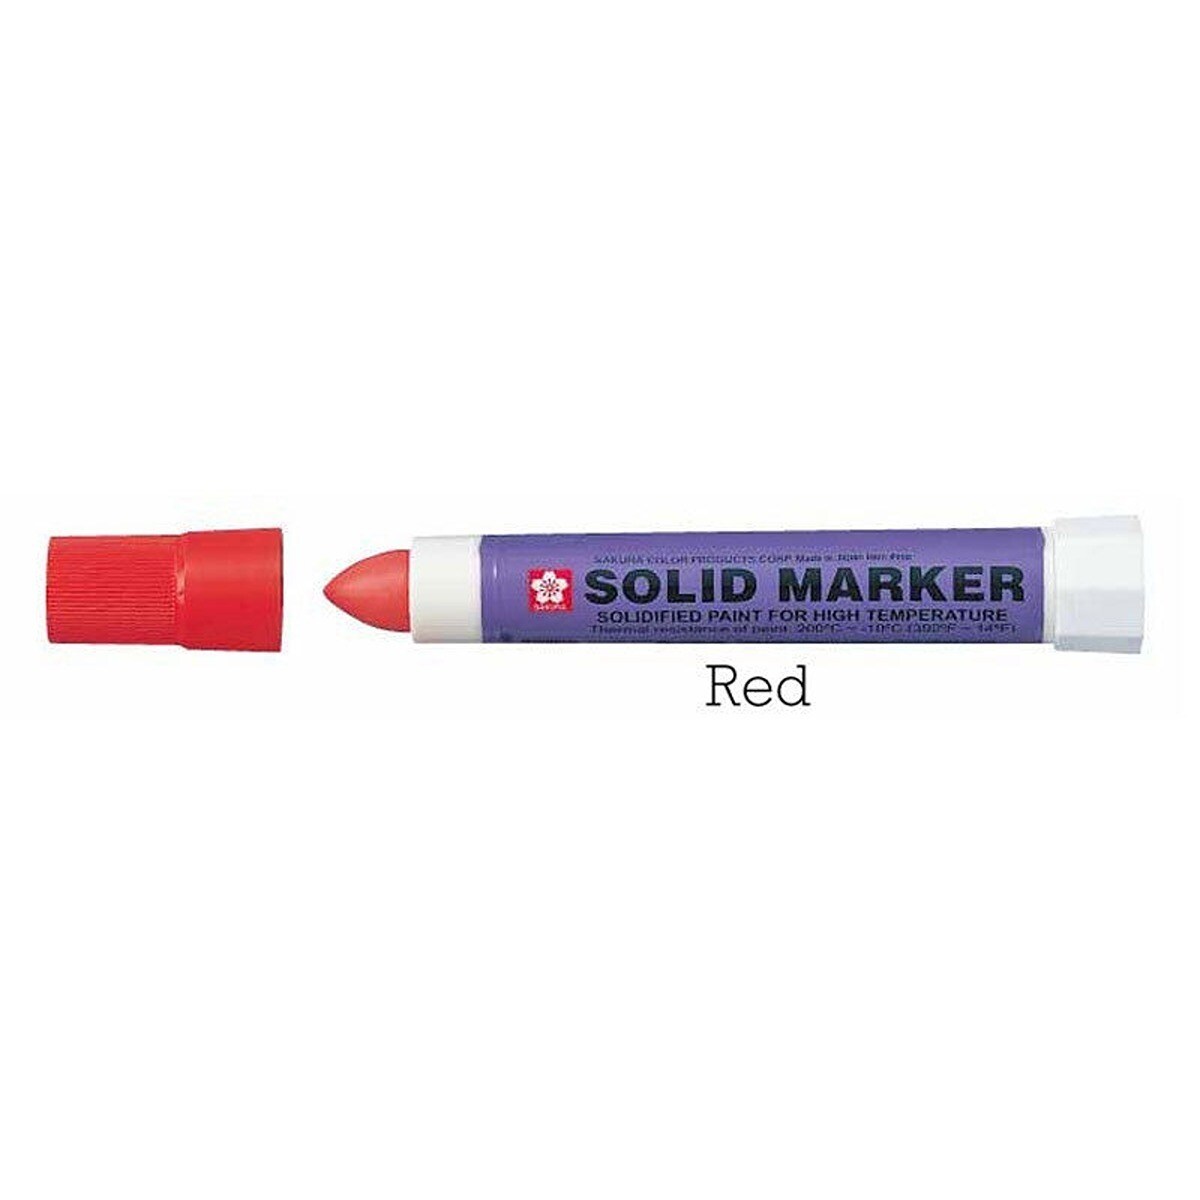 Windshield paint markers on sale at discount prices